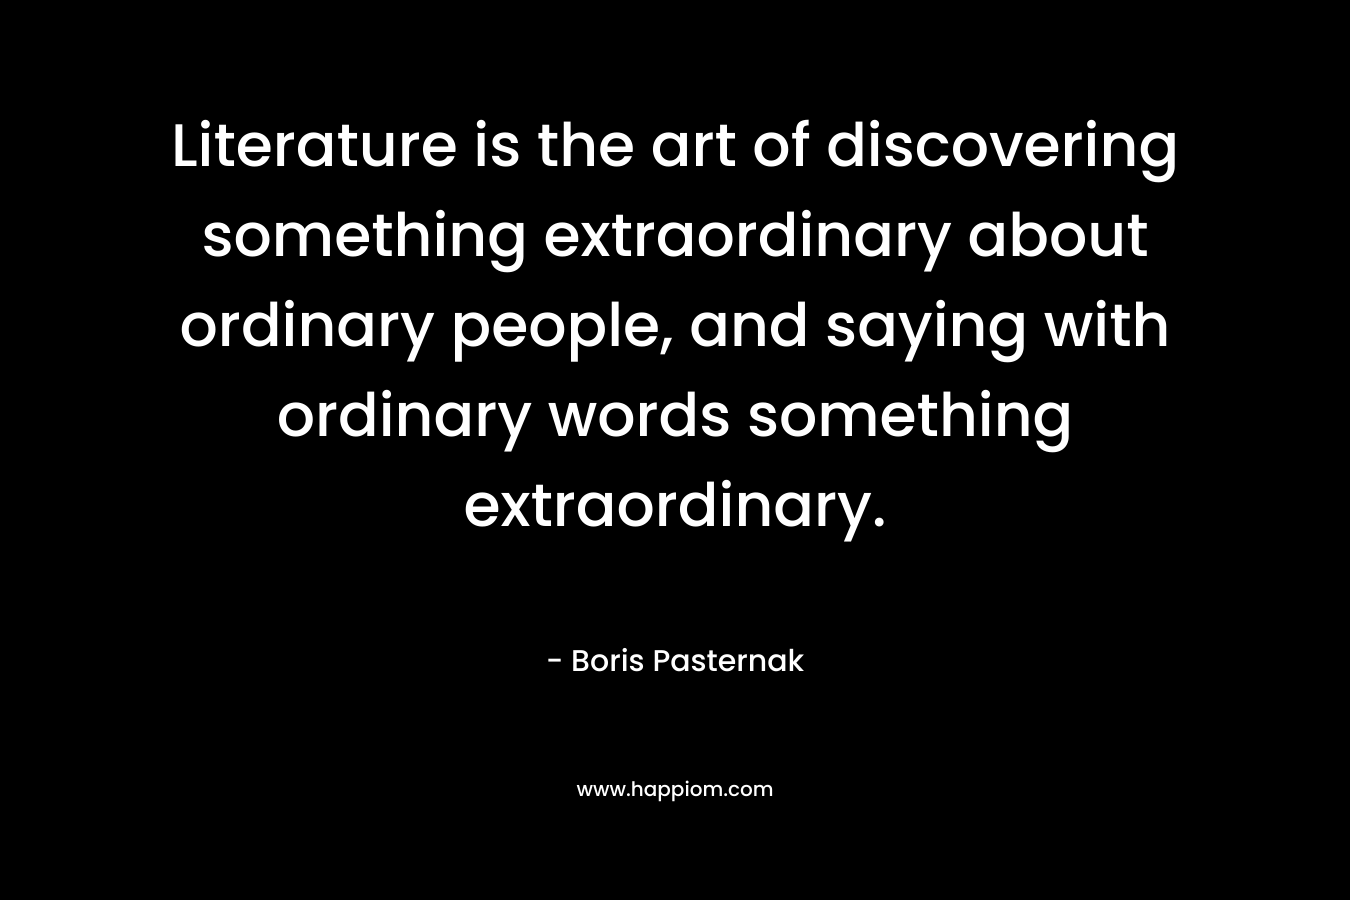 Literature is the art of discovering something extraordinary about ordinary people, and saying with ordinary words something extraordinary.